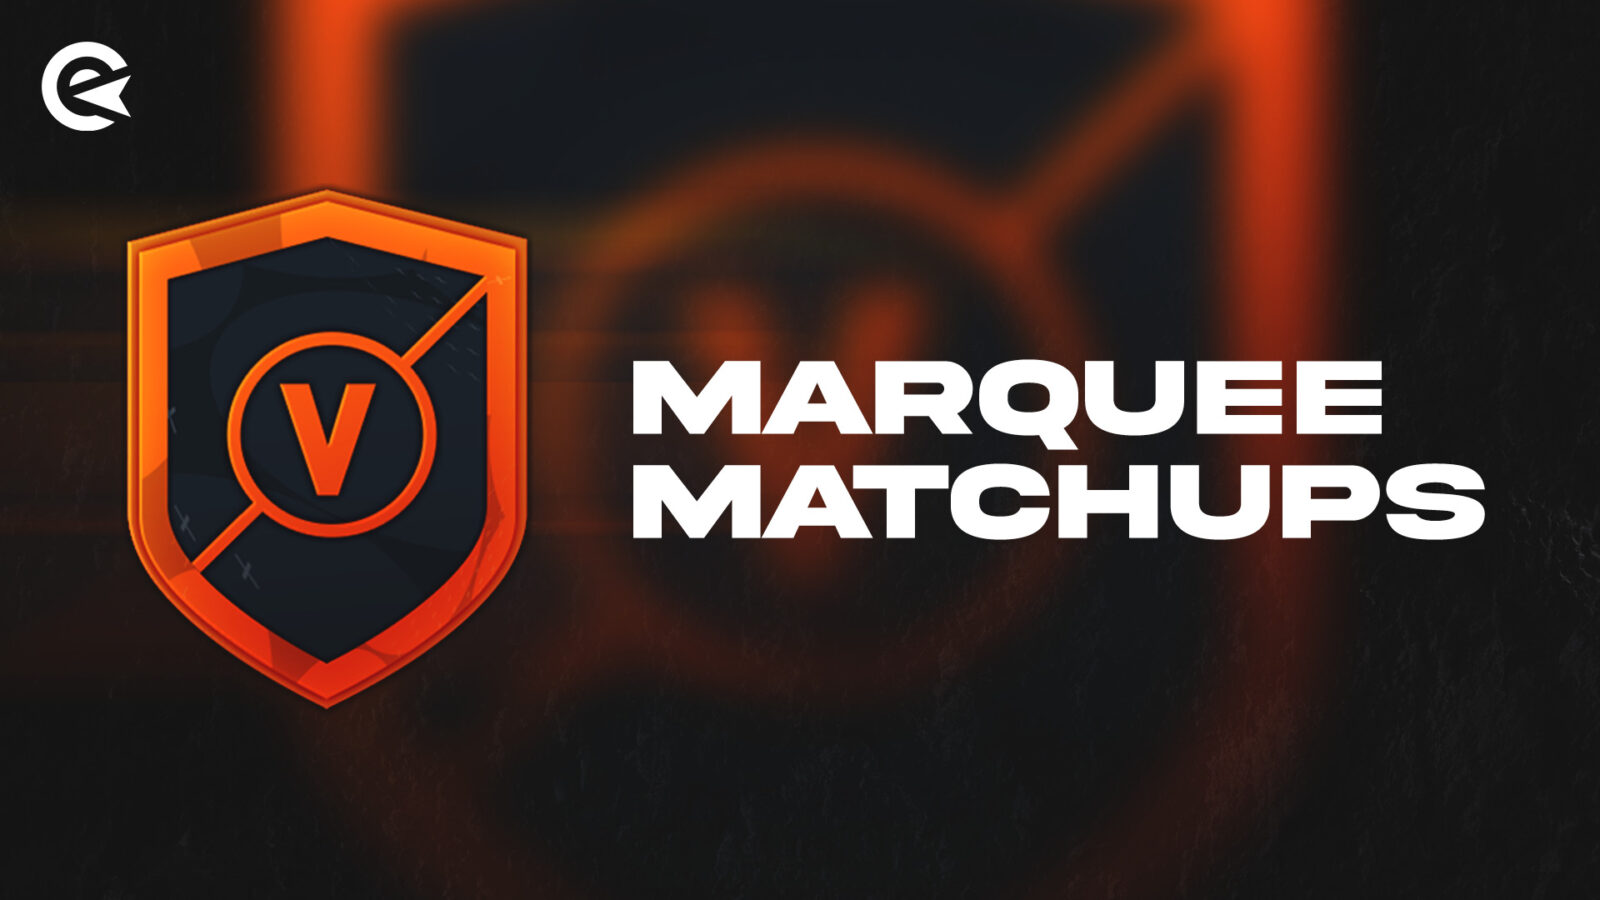 Marquee Matchups Squad Building Challenge in FIFA 23